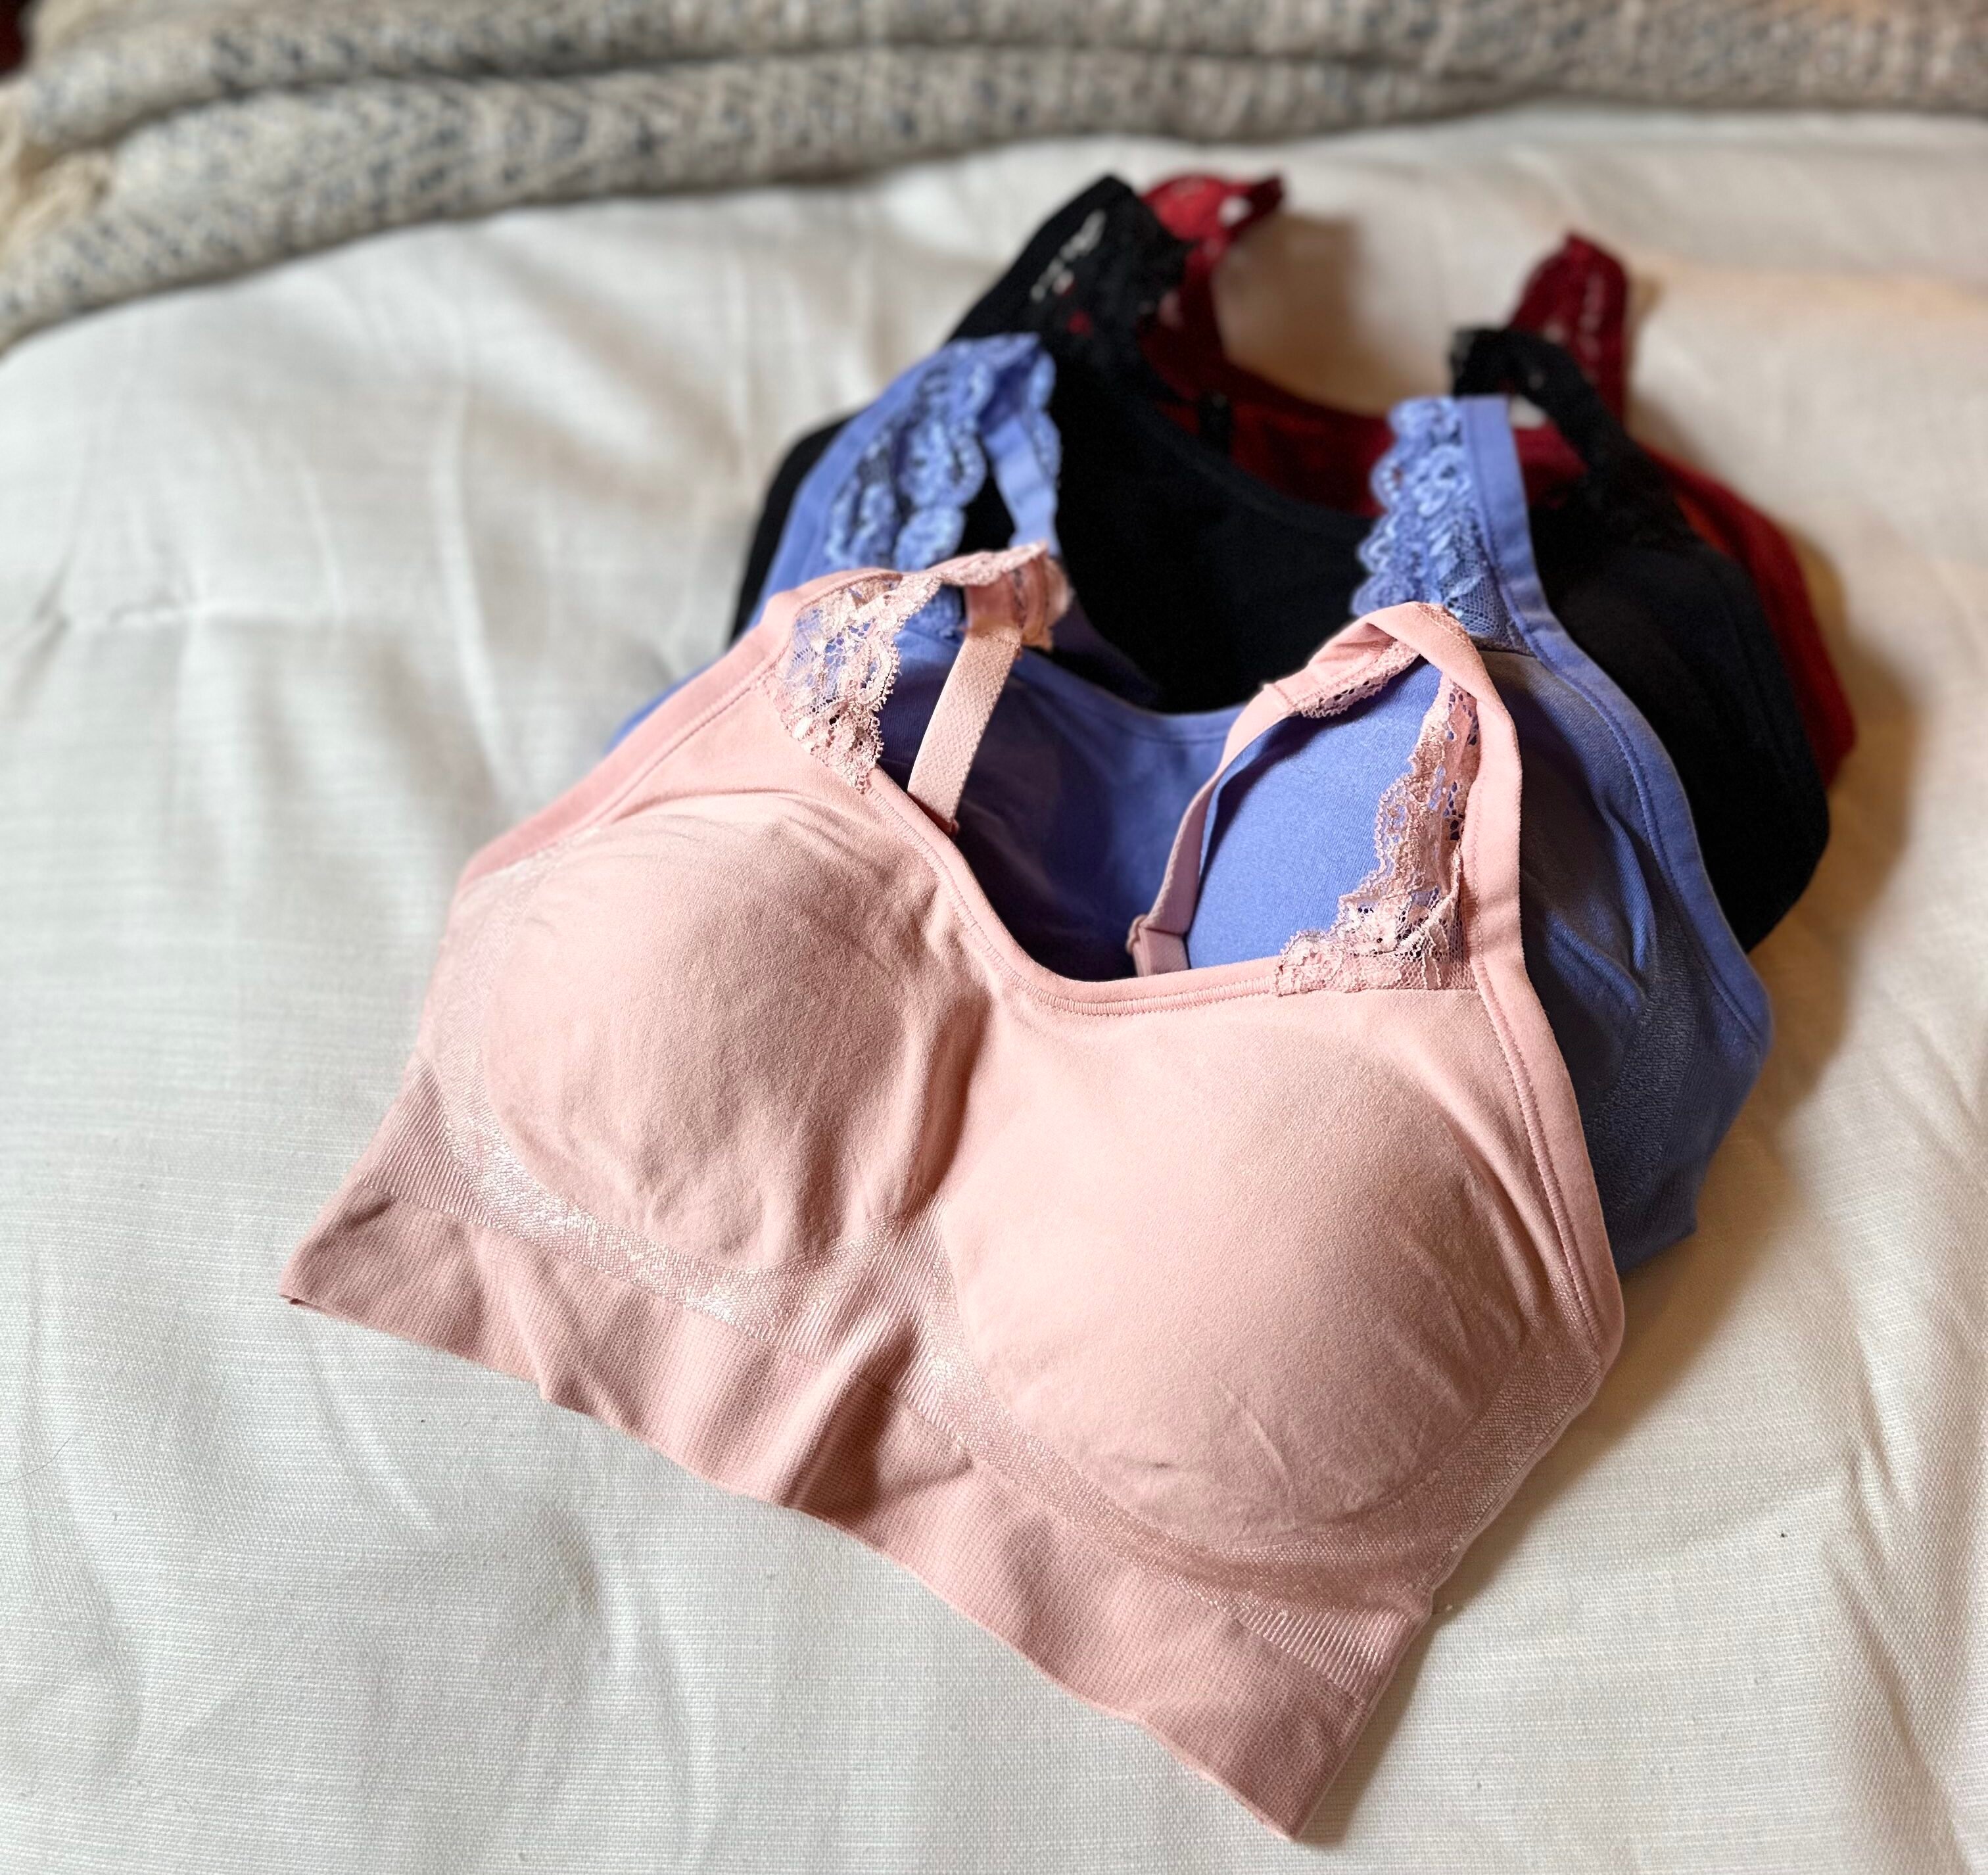 Where has this bra been my whole life? - Underoutfit